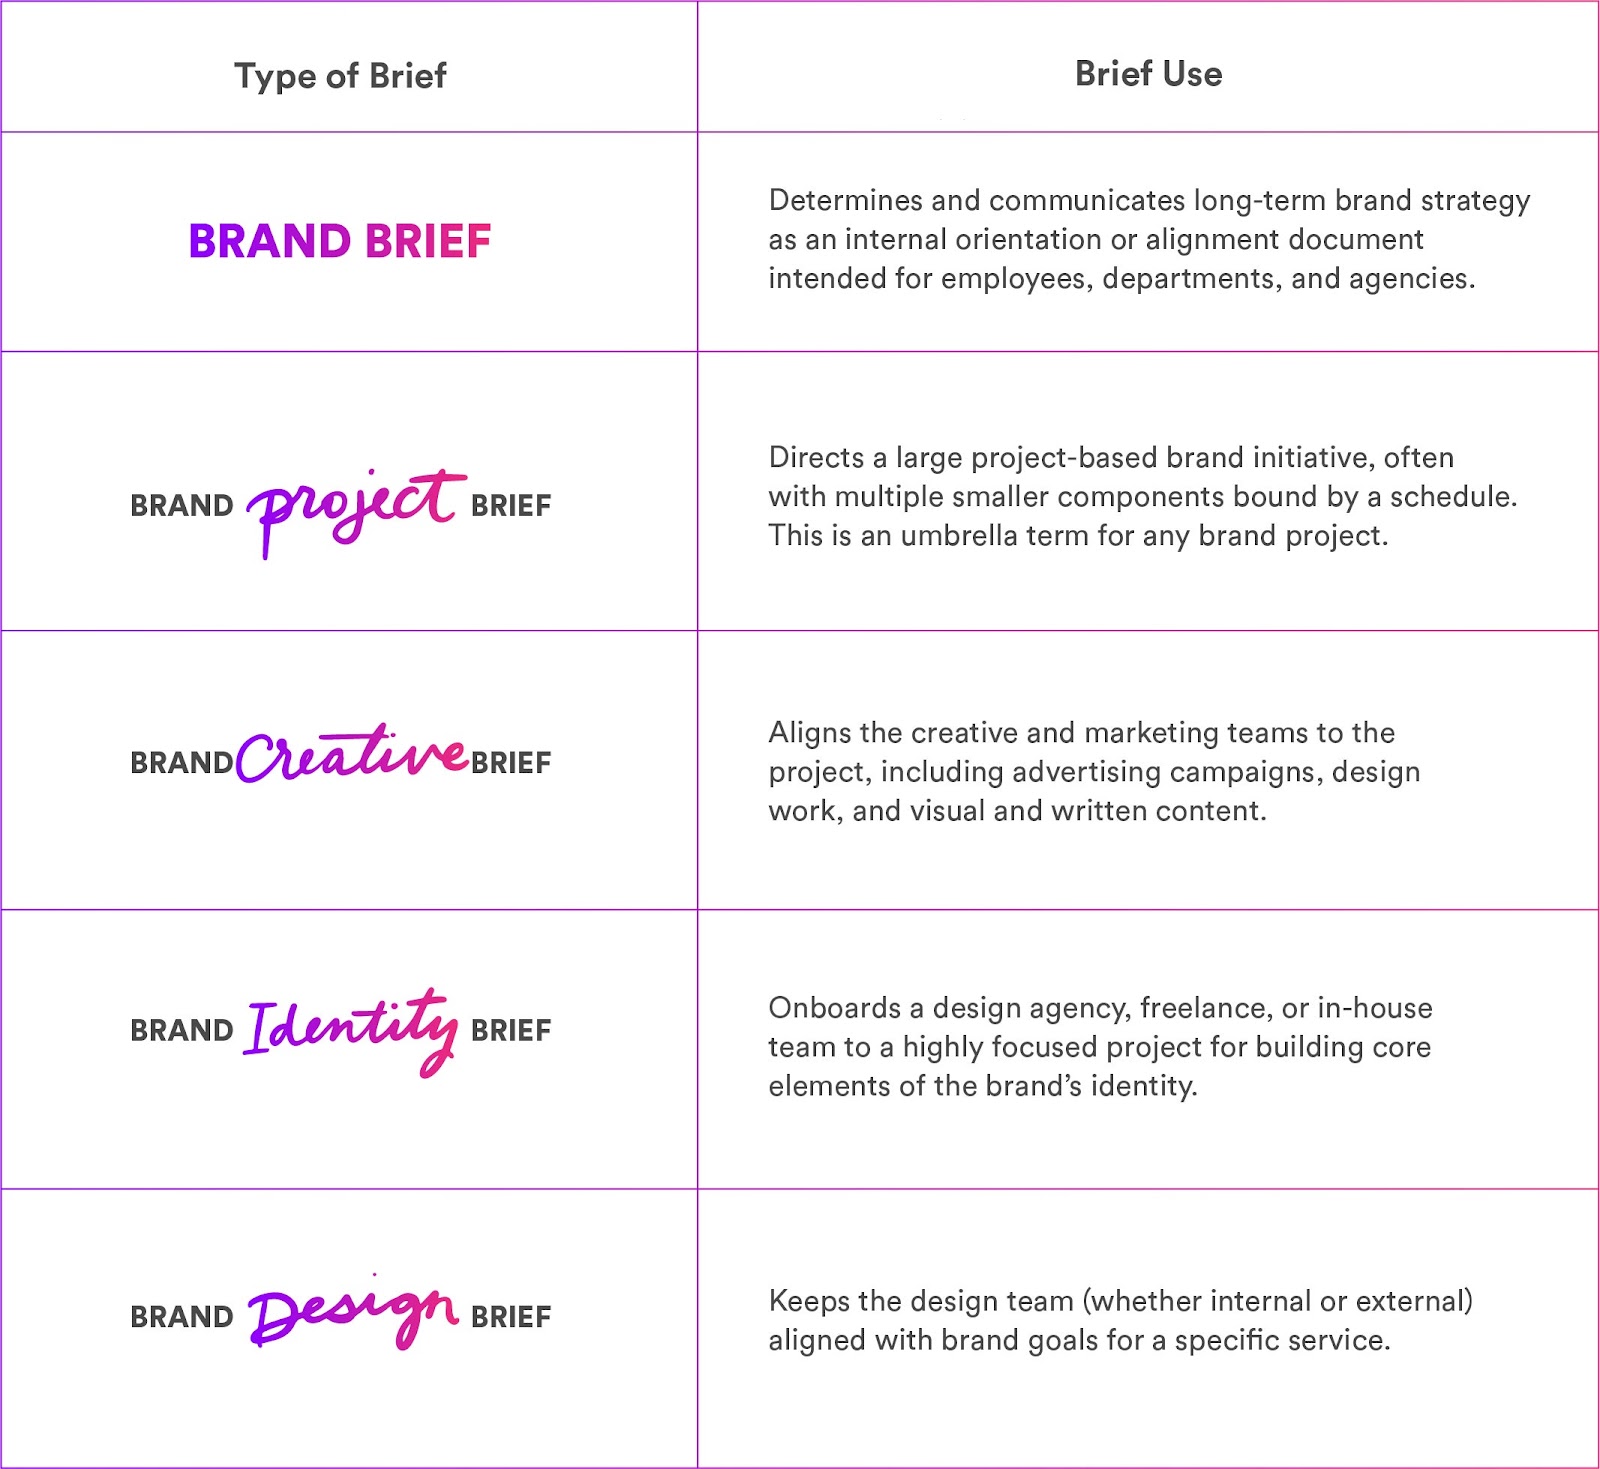 difference-between-brand-briefs